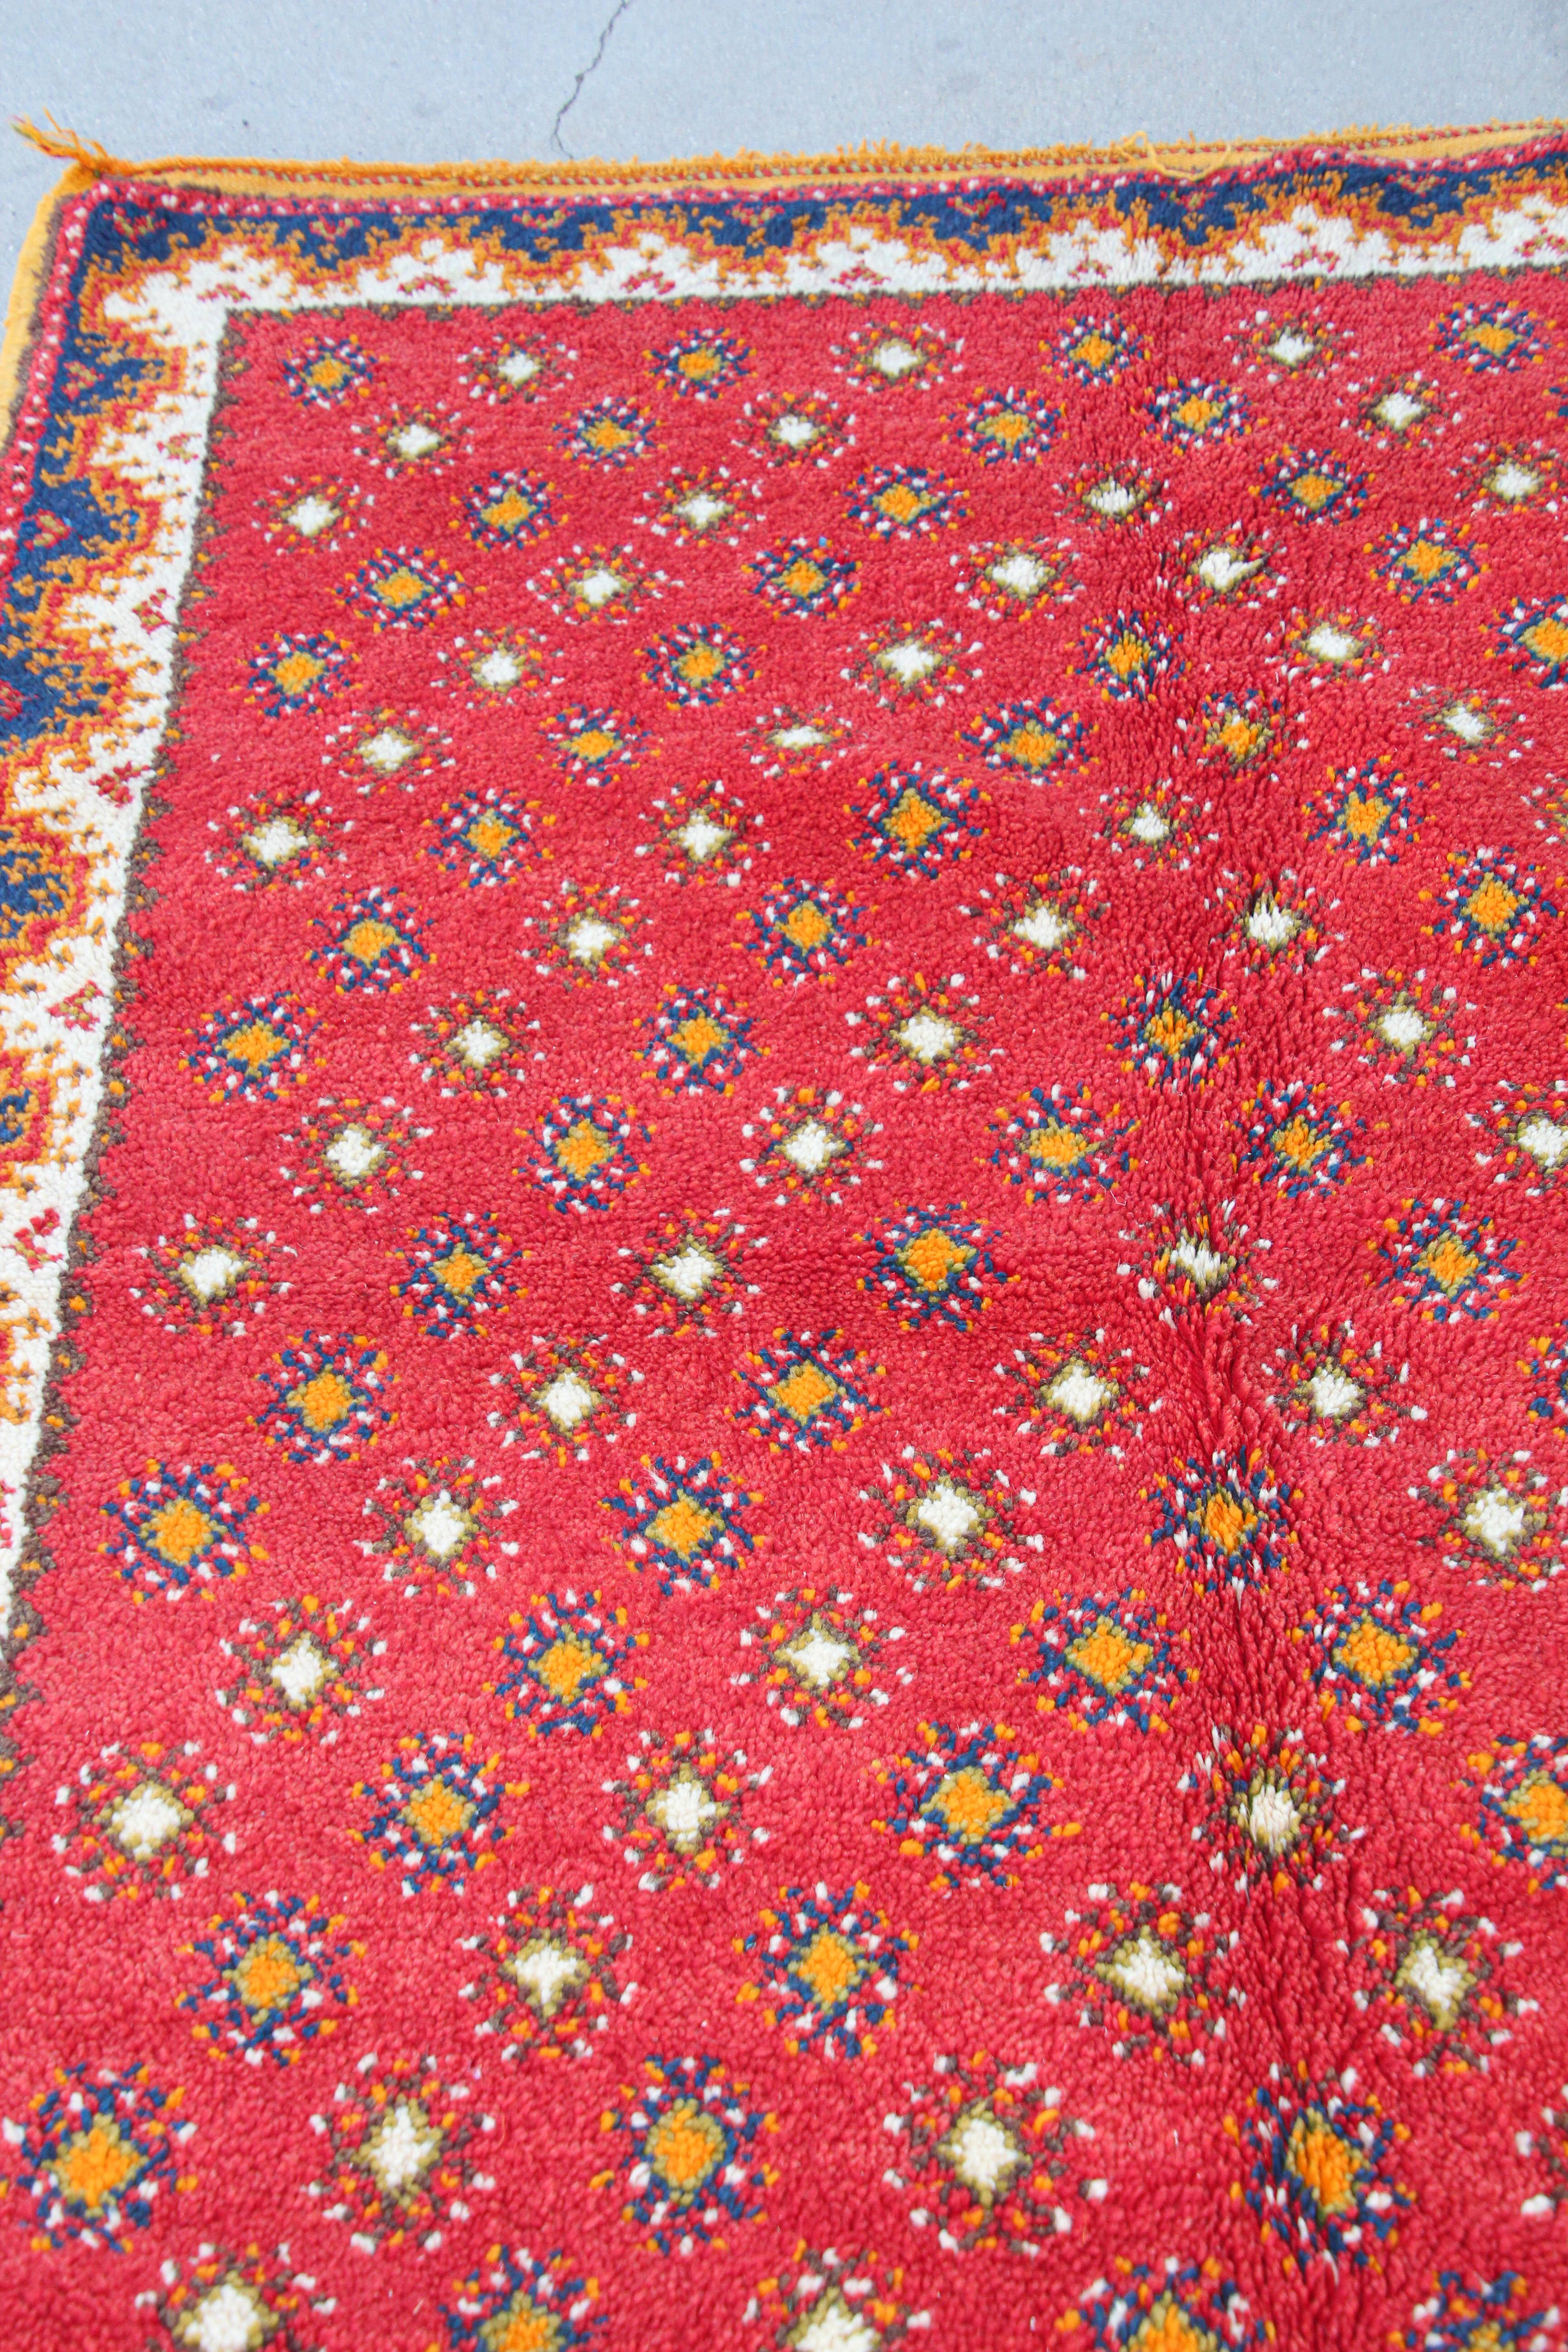 1960s Vintage Moroccan Hand-Woven Berber Carpet In Good Condition For Sale In North Hollywood, CA